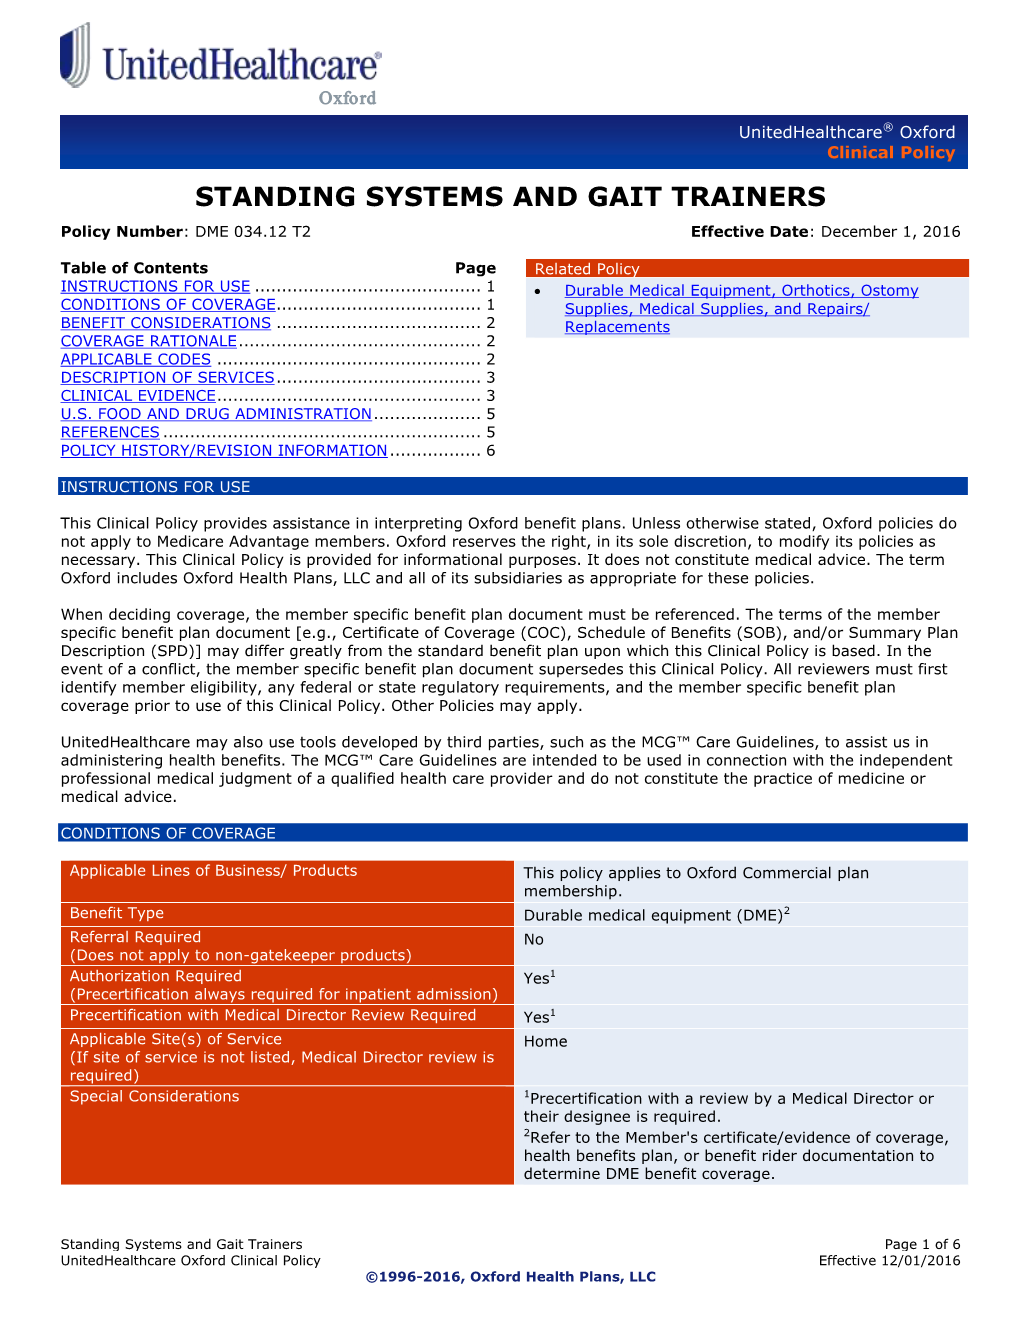 STANDING SYSTEMS and GAIT TRAINERS Policy Number: DME 034.12 T2 Effective Date: December 1, 2016